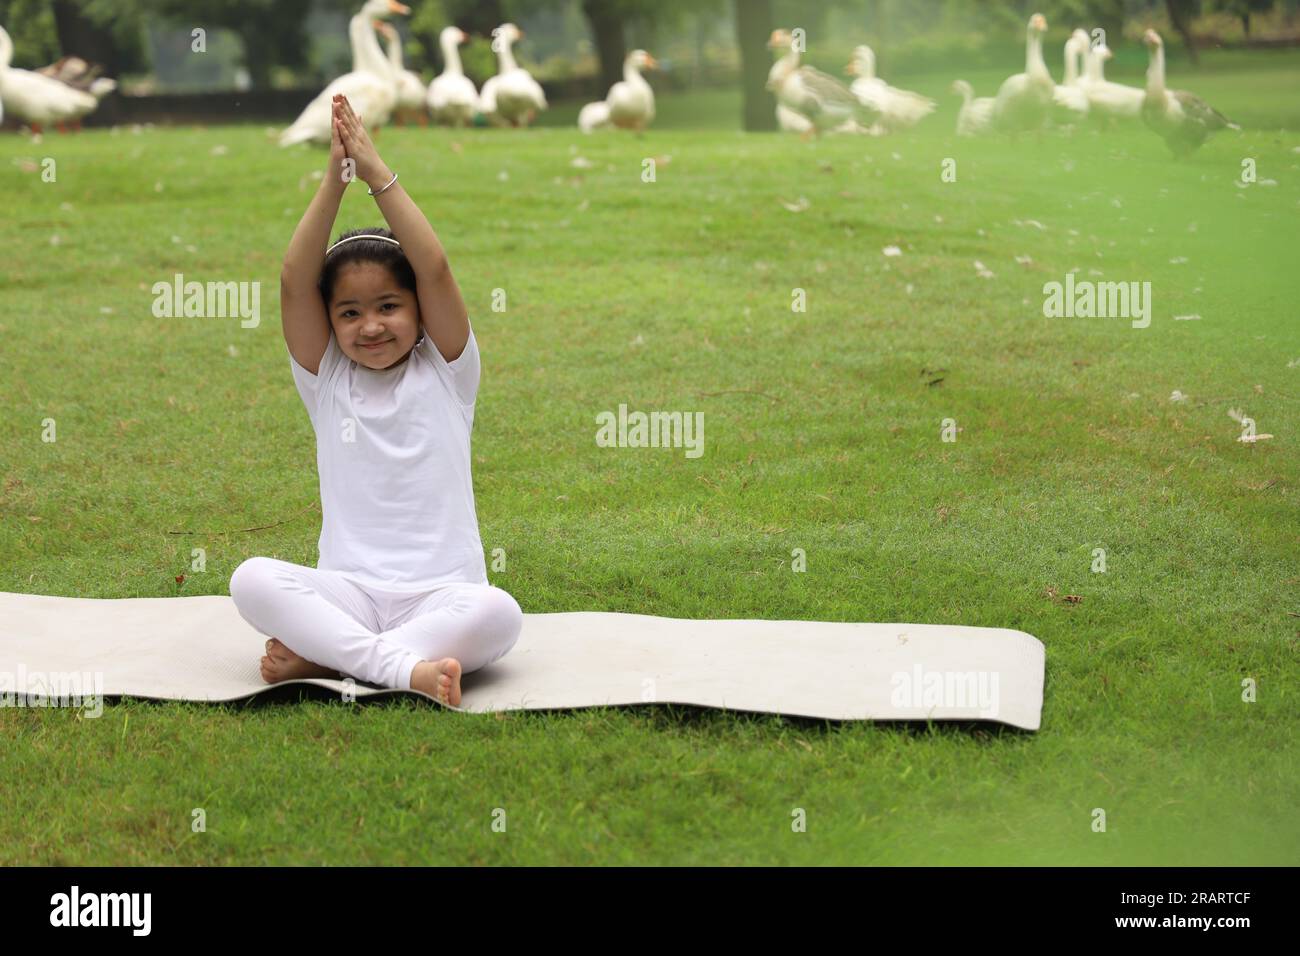 Young kid doing yoga exercises early morning in a green public park. We can see ducks around. The child is health conscious. Happy girl yoga. Stock Photo